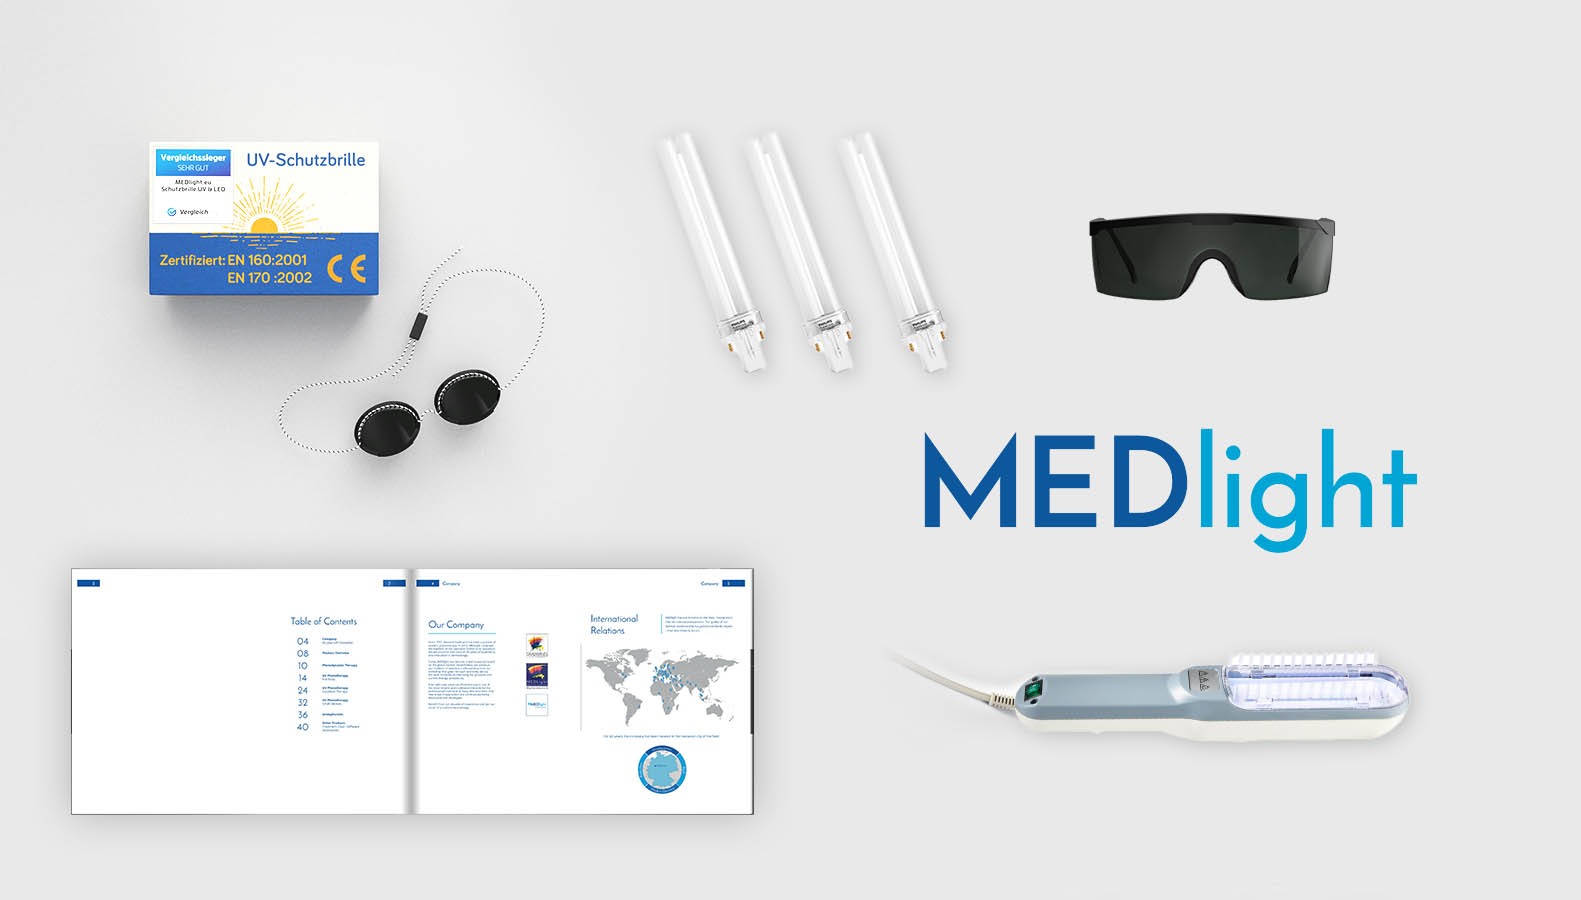 Assortment of MEDlight products